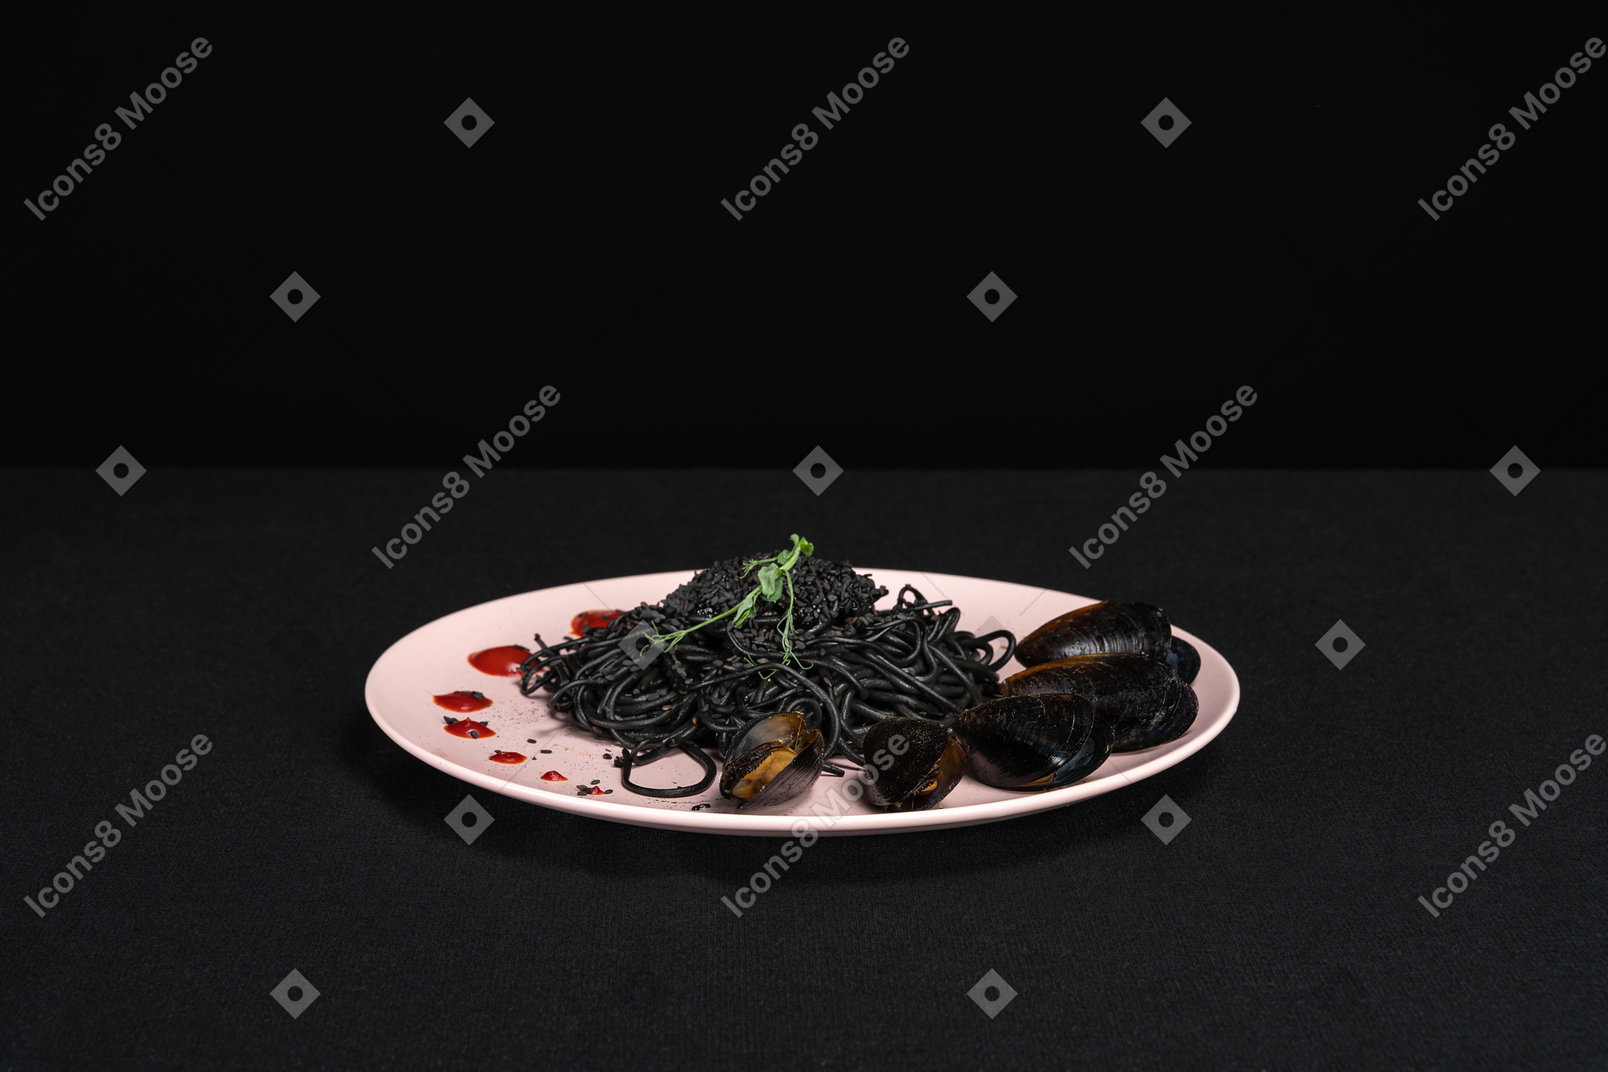 Black pasta with mussels on pink plate in black background